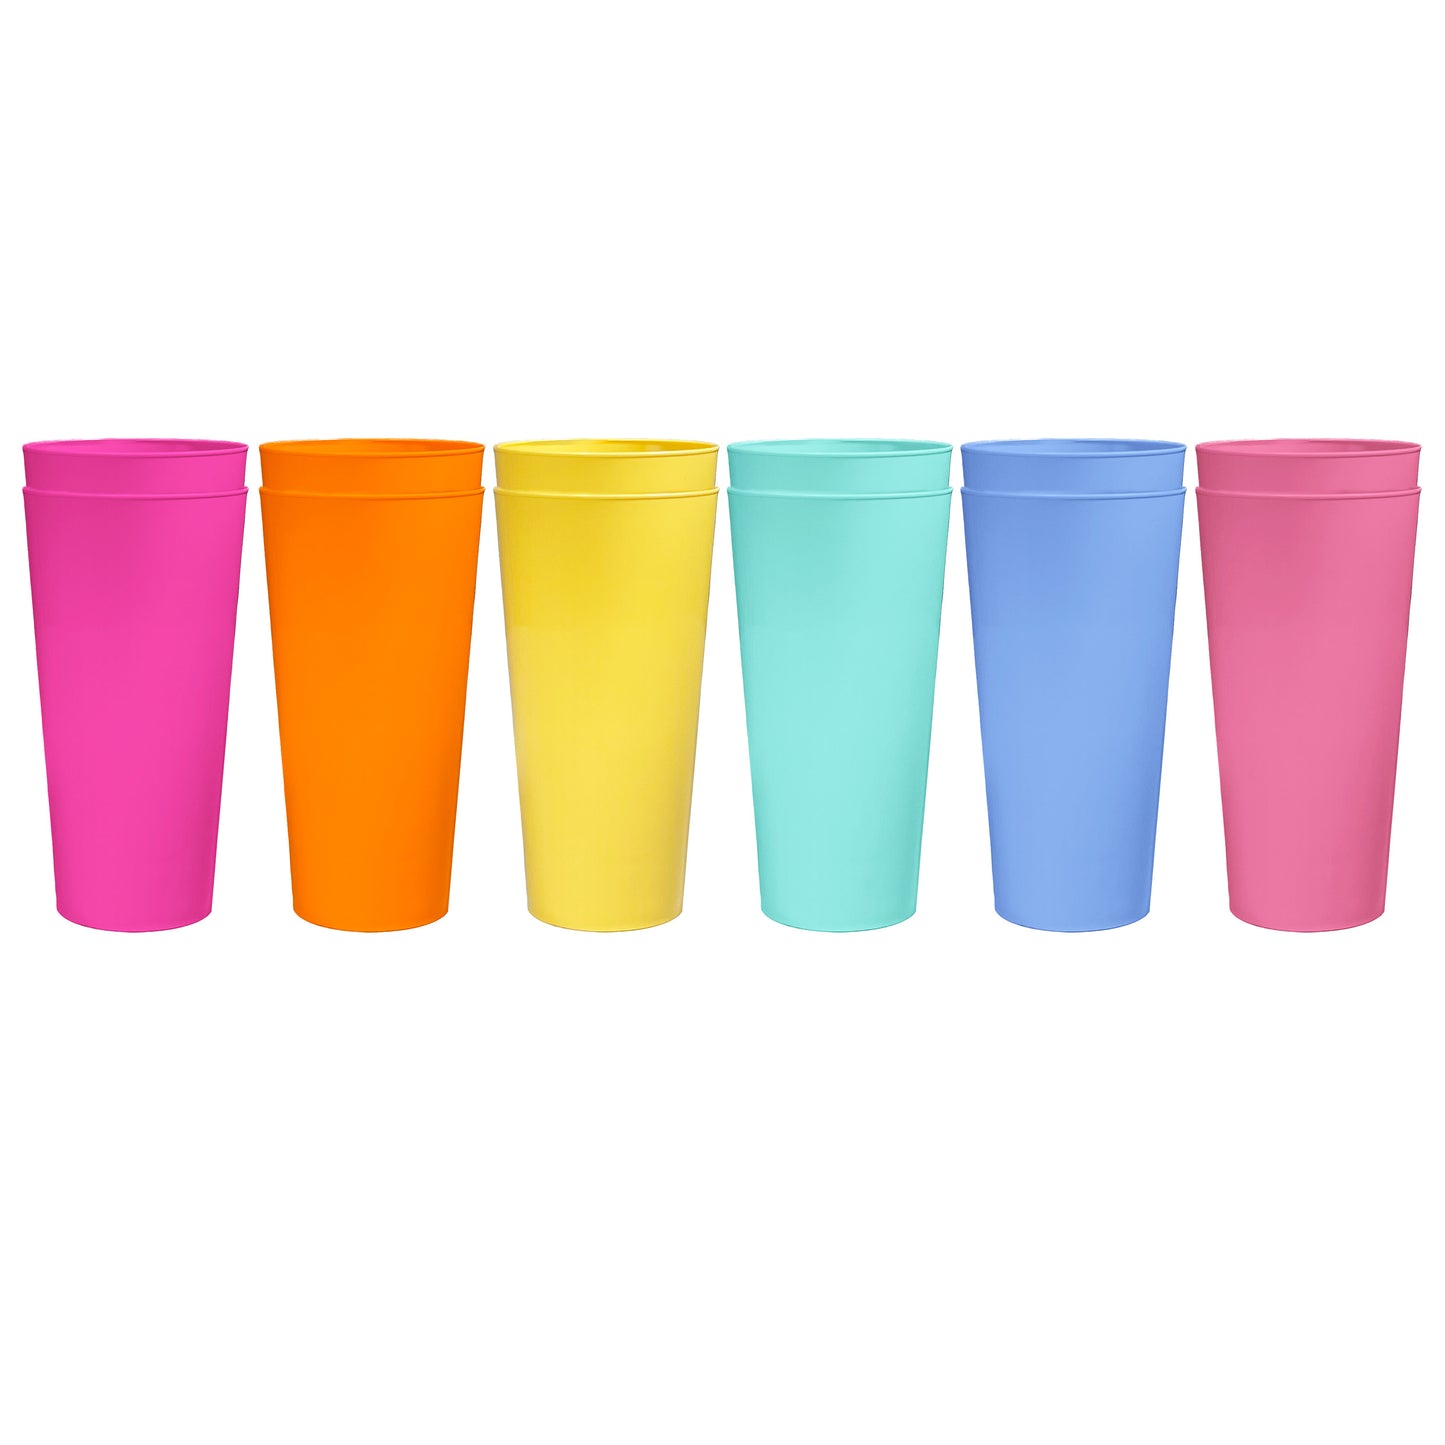 Pack of 24 Pint Cups Coloured Reusable Plastic - 1 Pint 568ml 20oz - Dishwasher Safe for Beer, Soft Drinks, Water - Six Colours (4 of Each Colour)